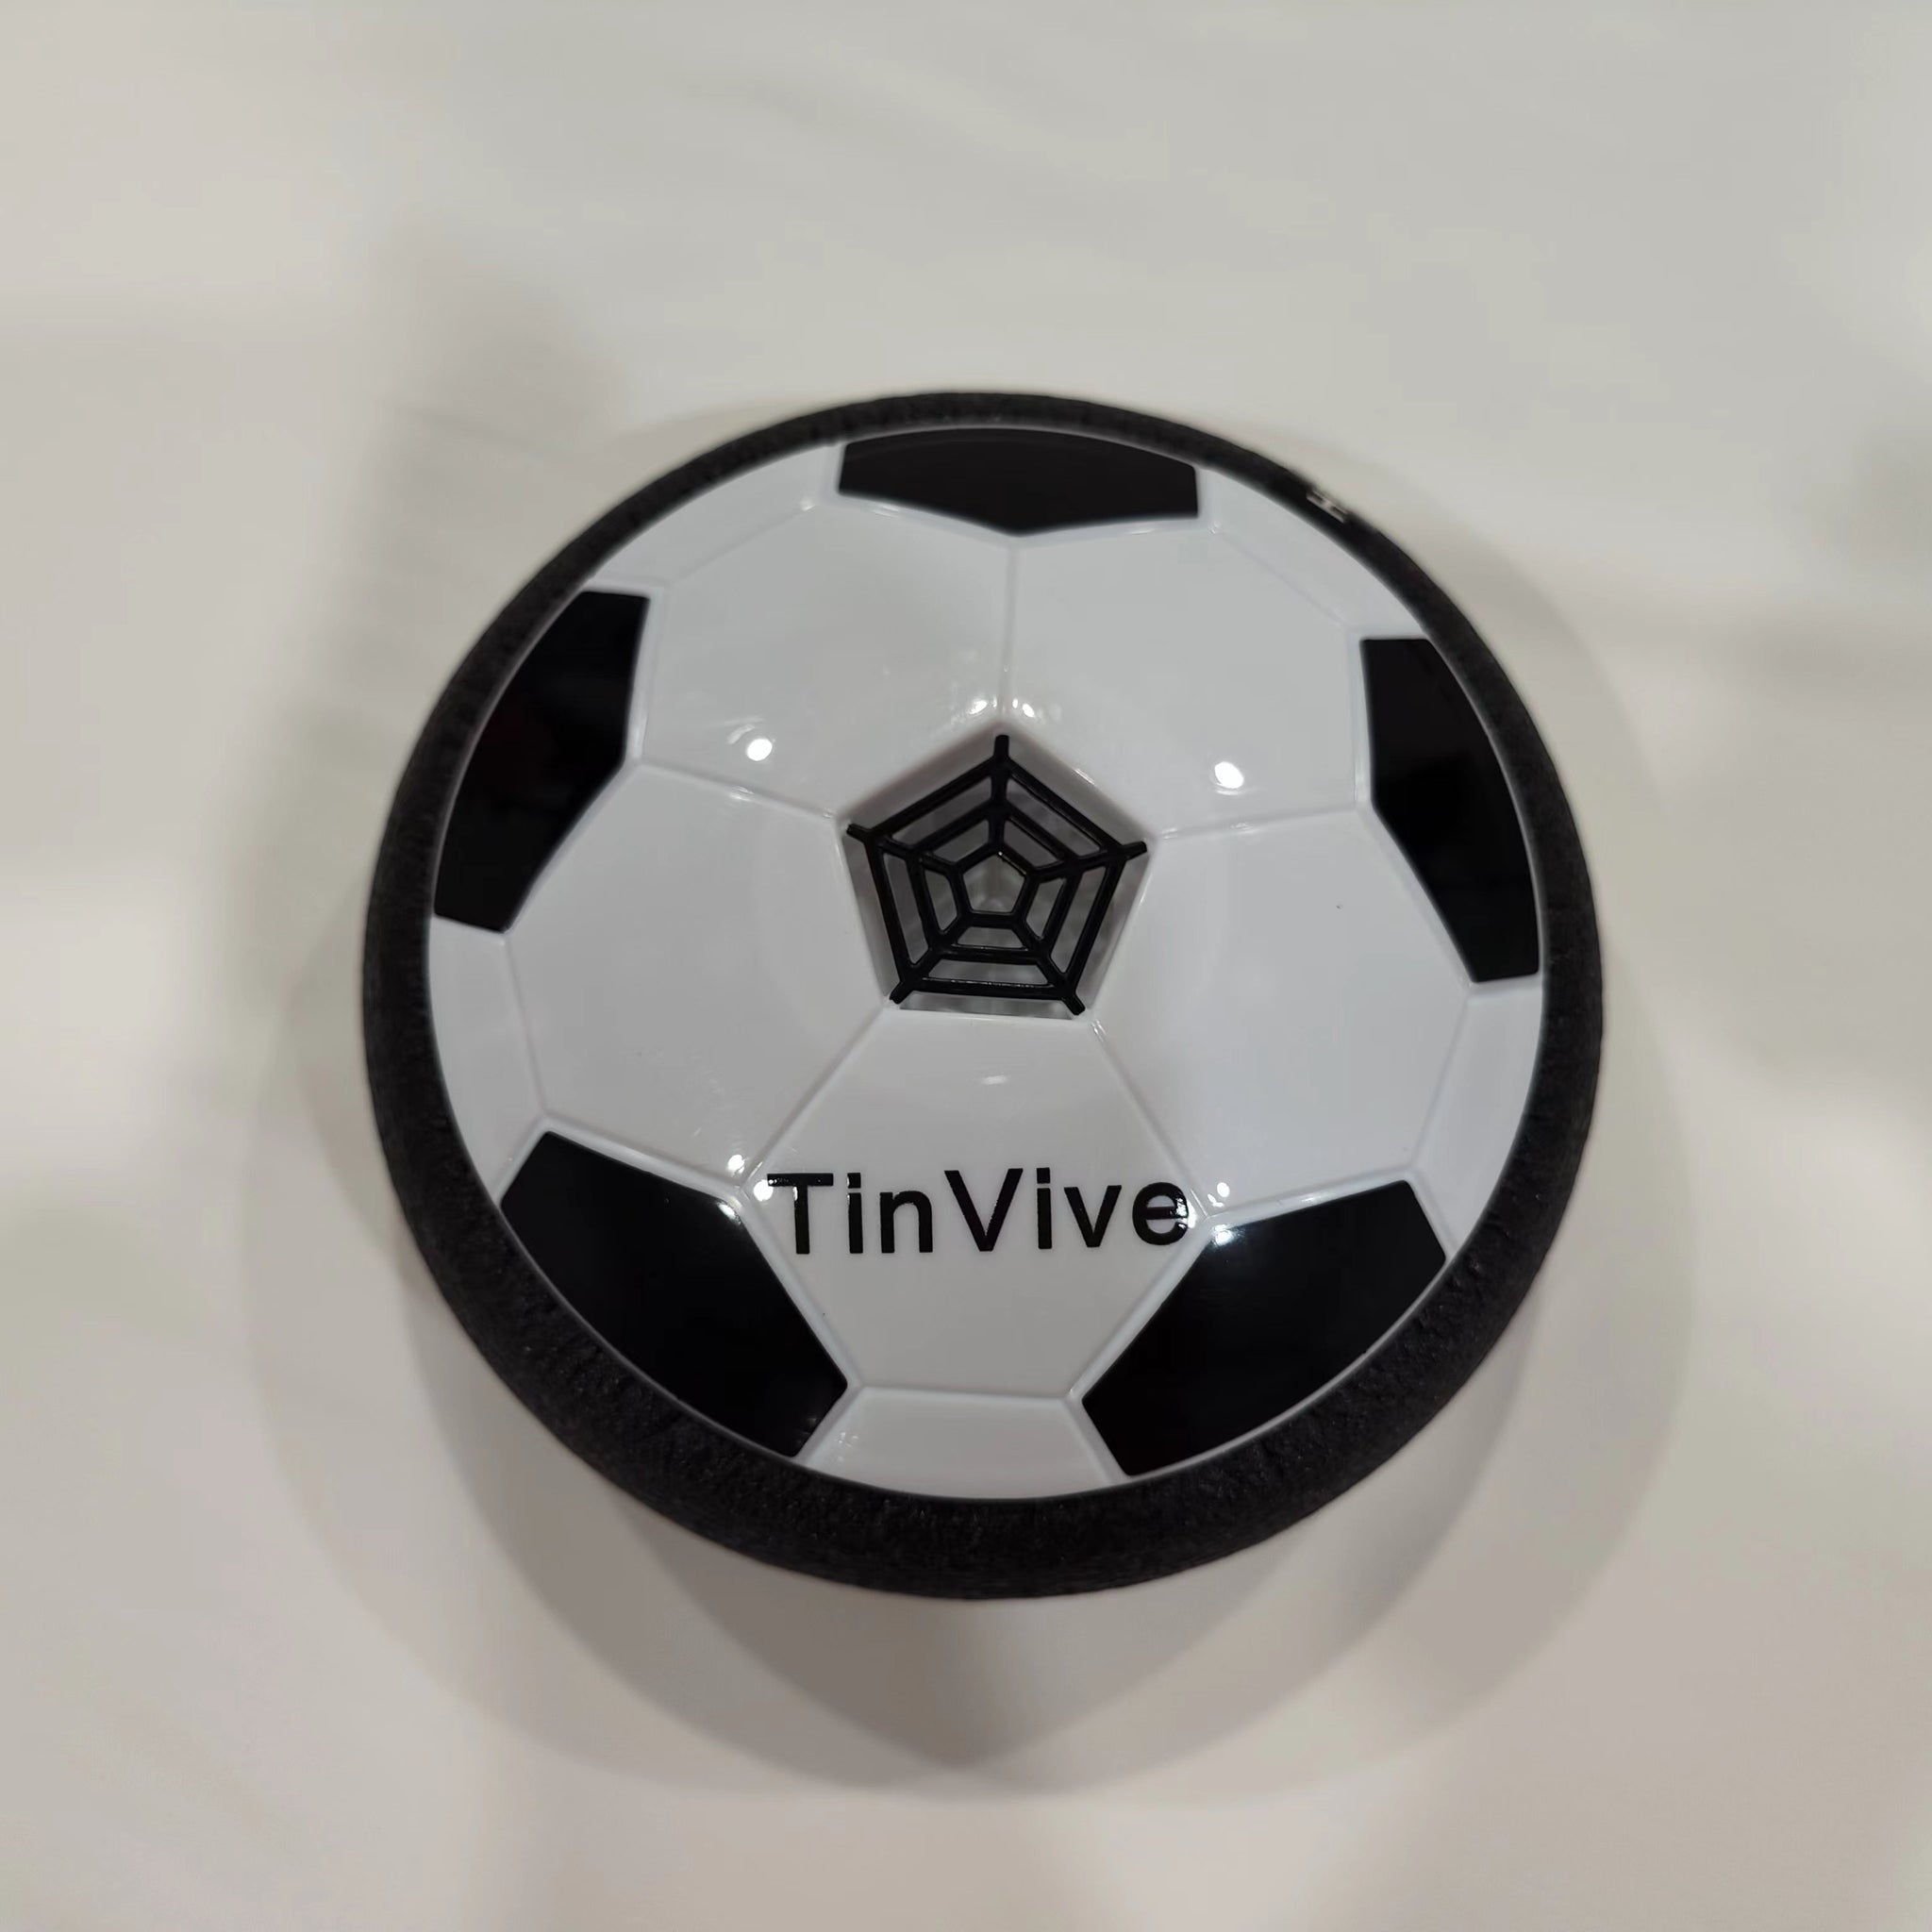 TinVive soccer toy